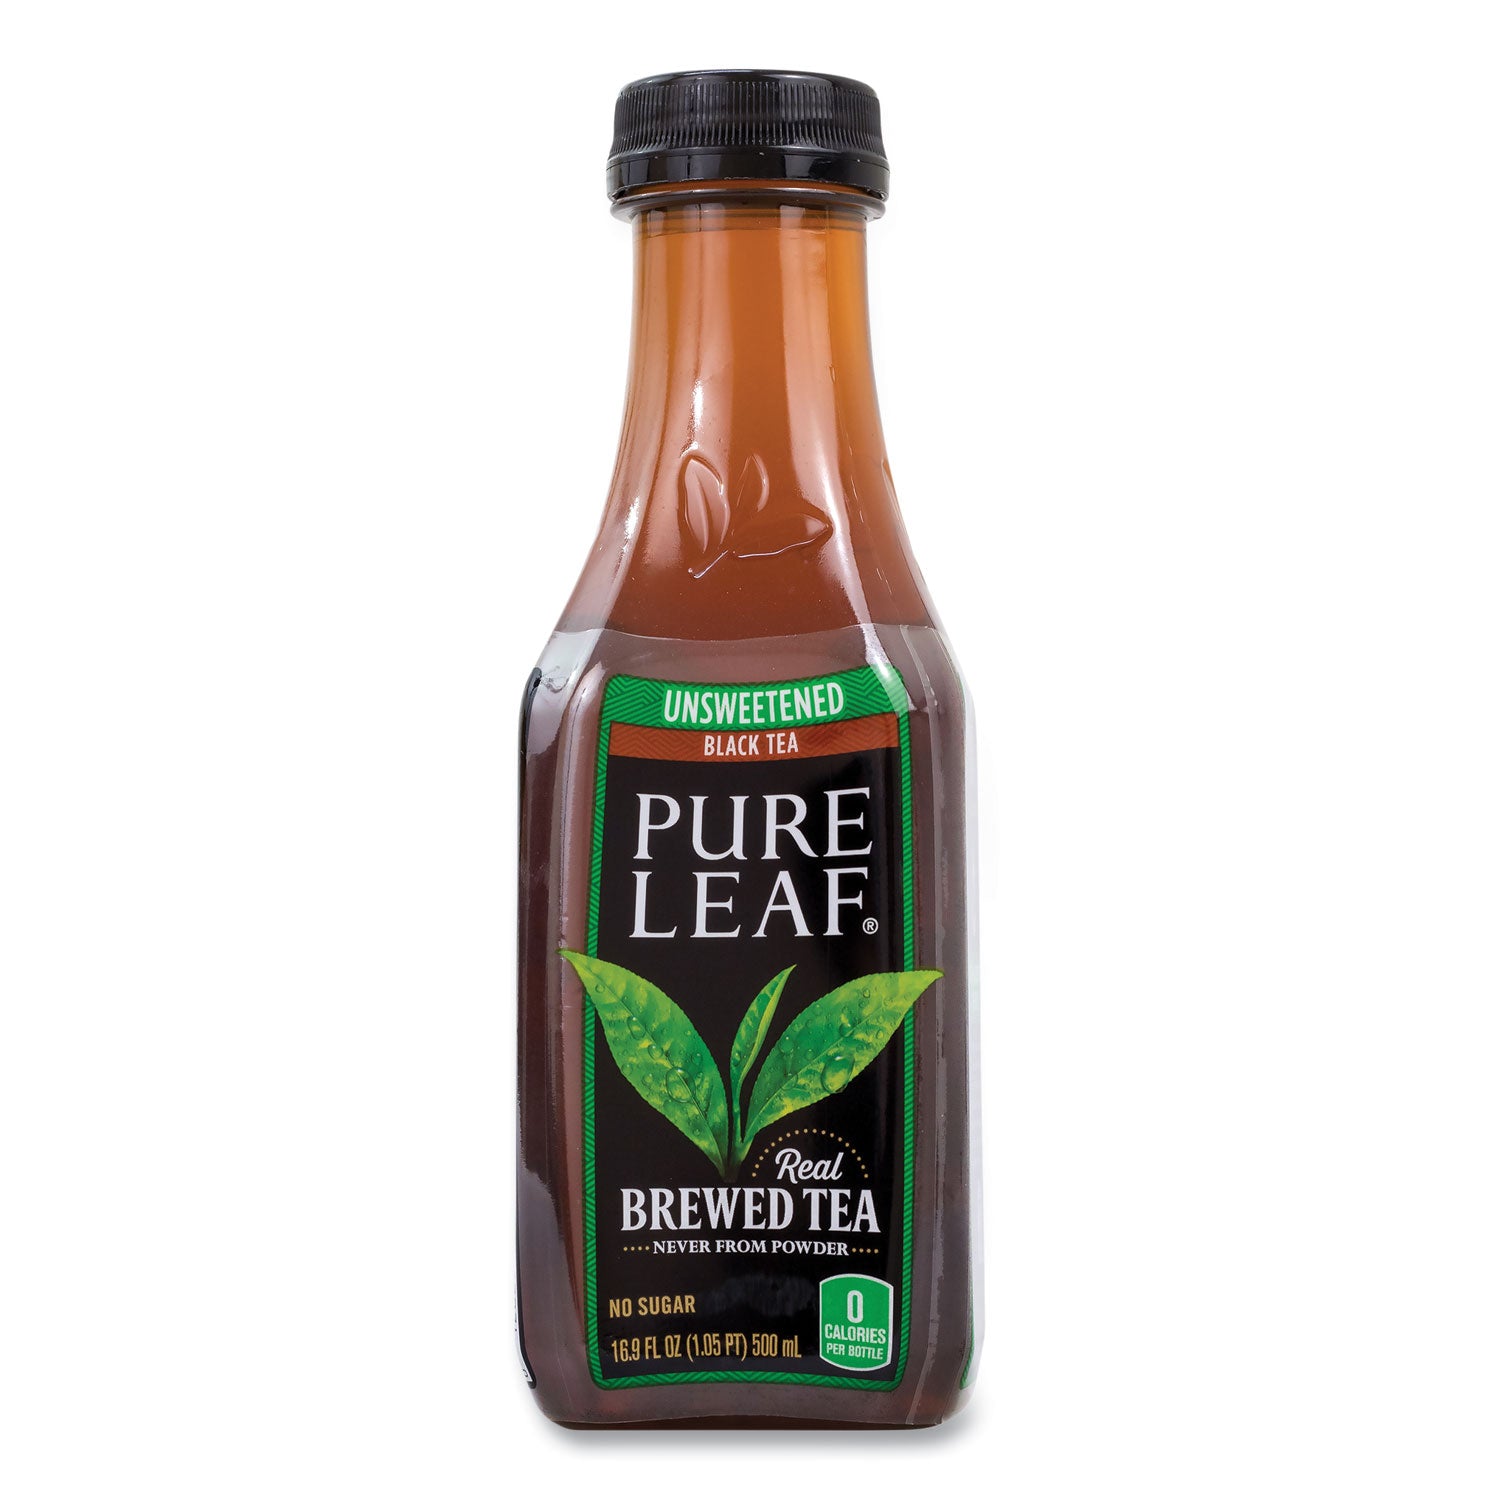 pure-leaf-unsweetened-iced-black-tea-169-oz-bottle-18-carton-ships-in-1-3-business-days_grr22002027 - 5